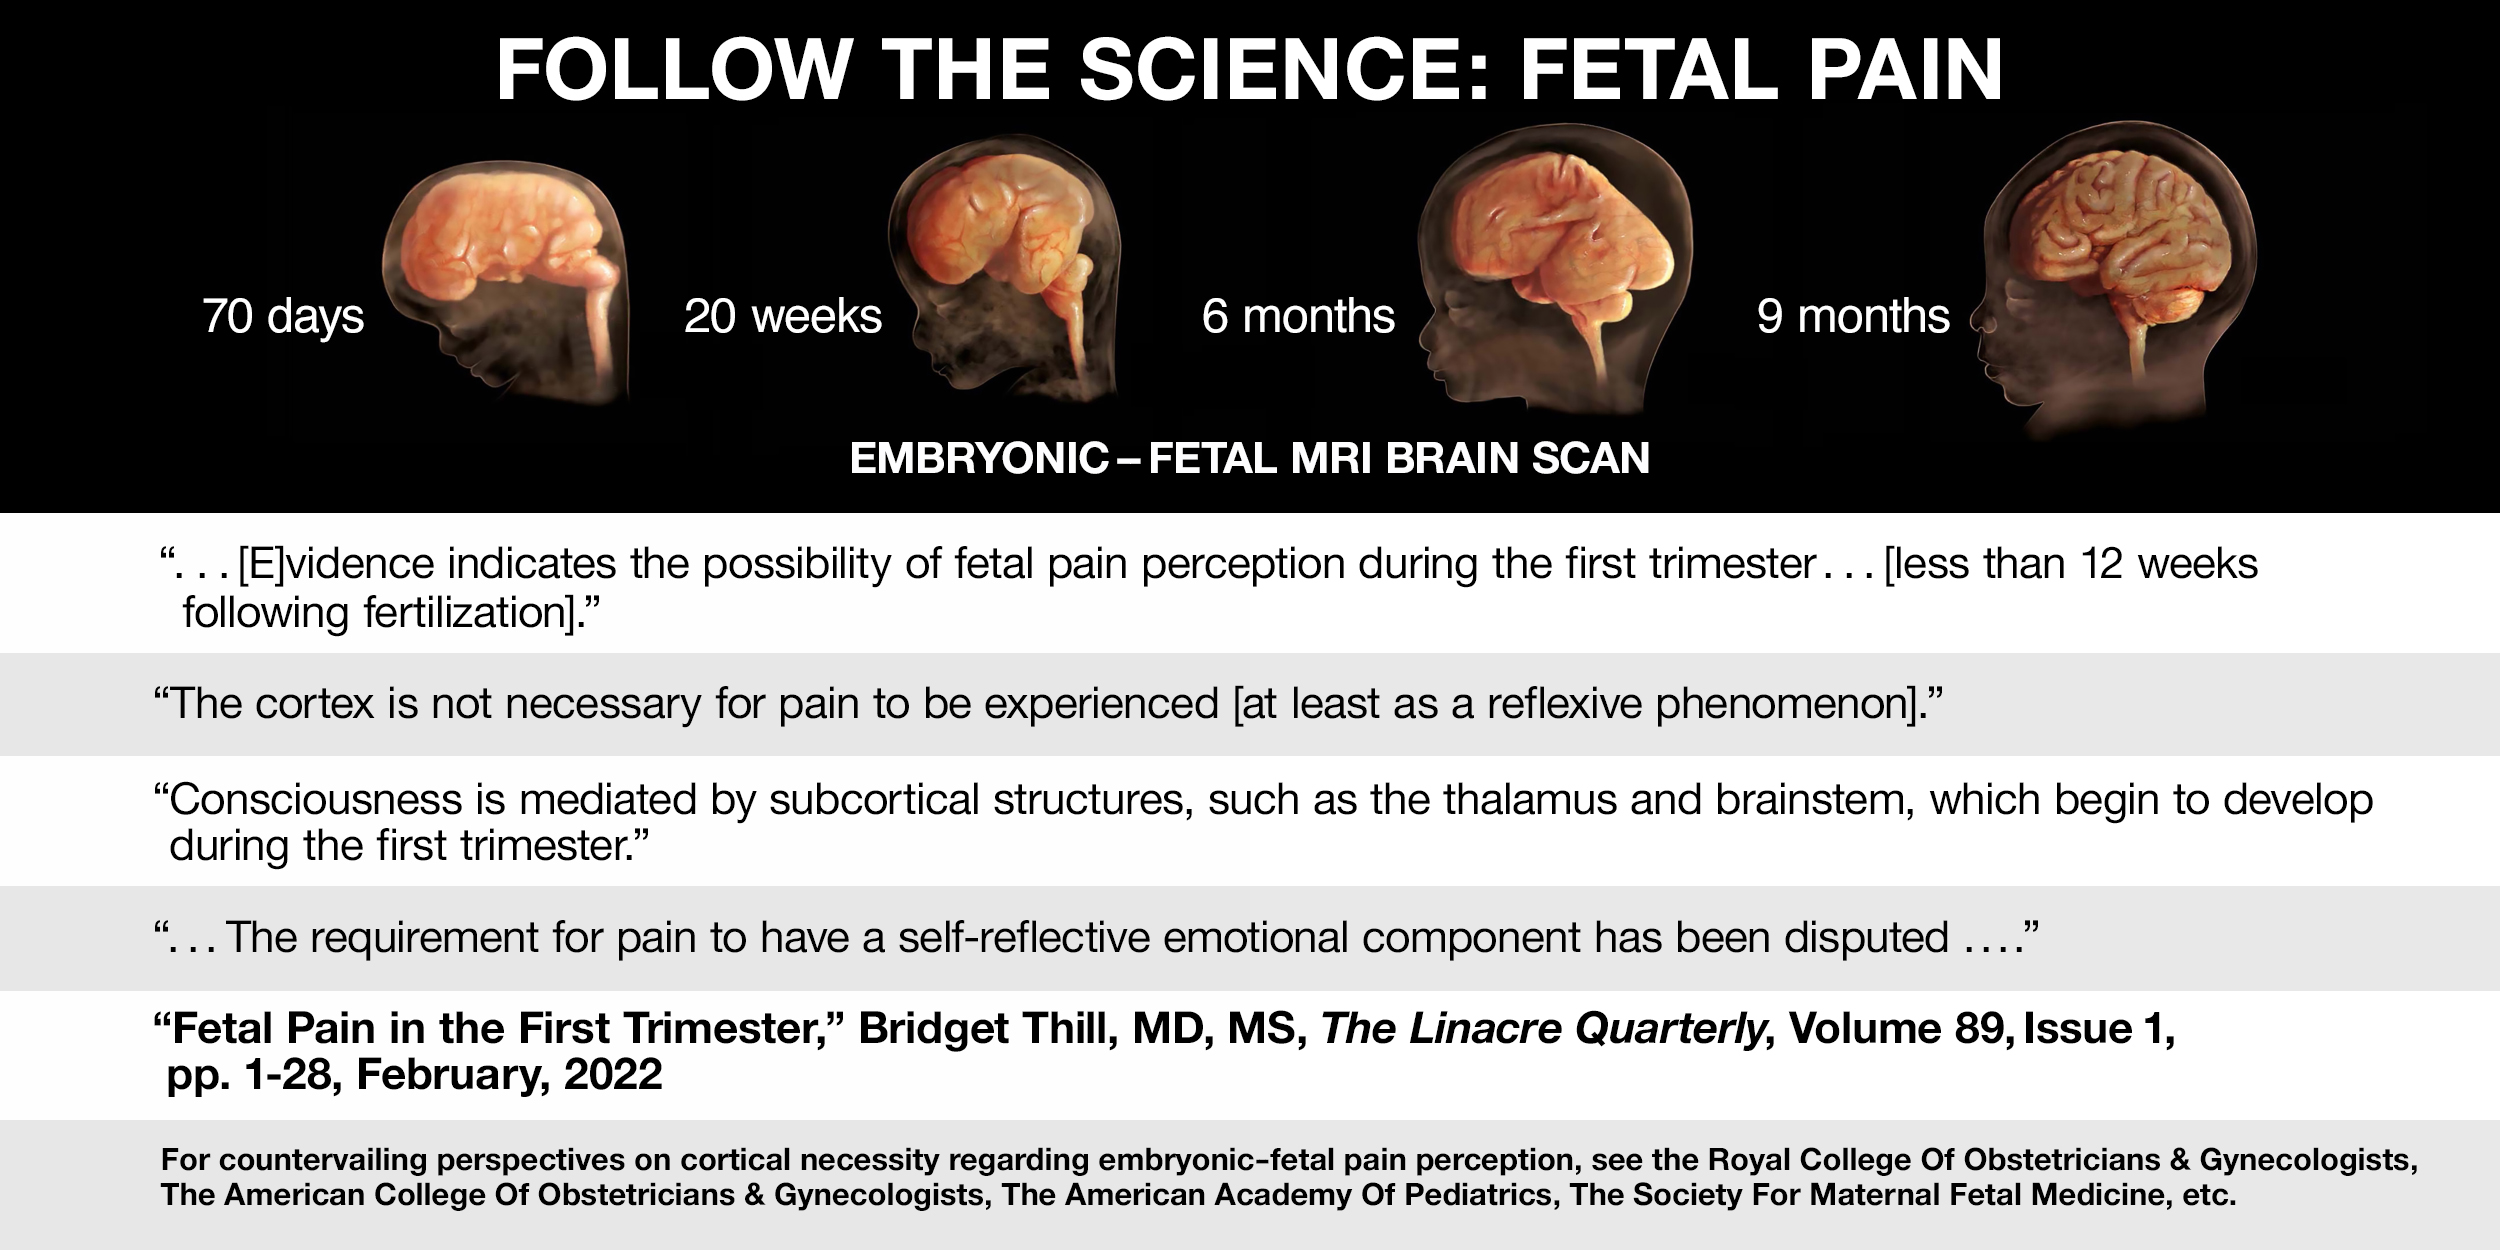 Follow the Science: Fetal pain evidence indicates the possibility of fetal pain perception during the first trimester